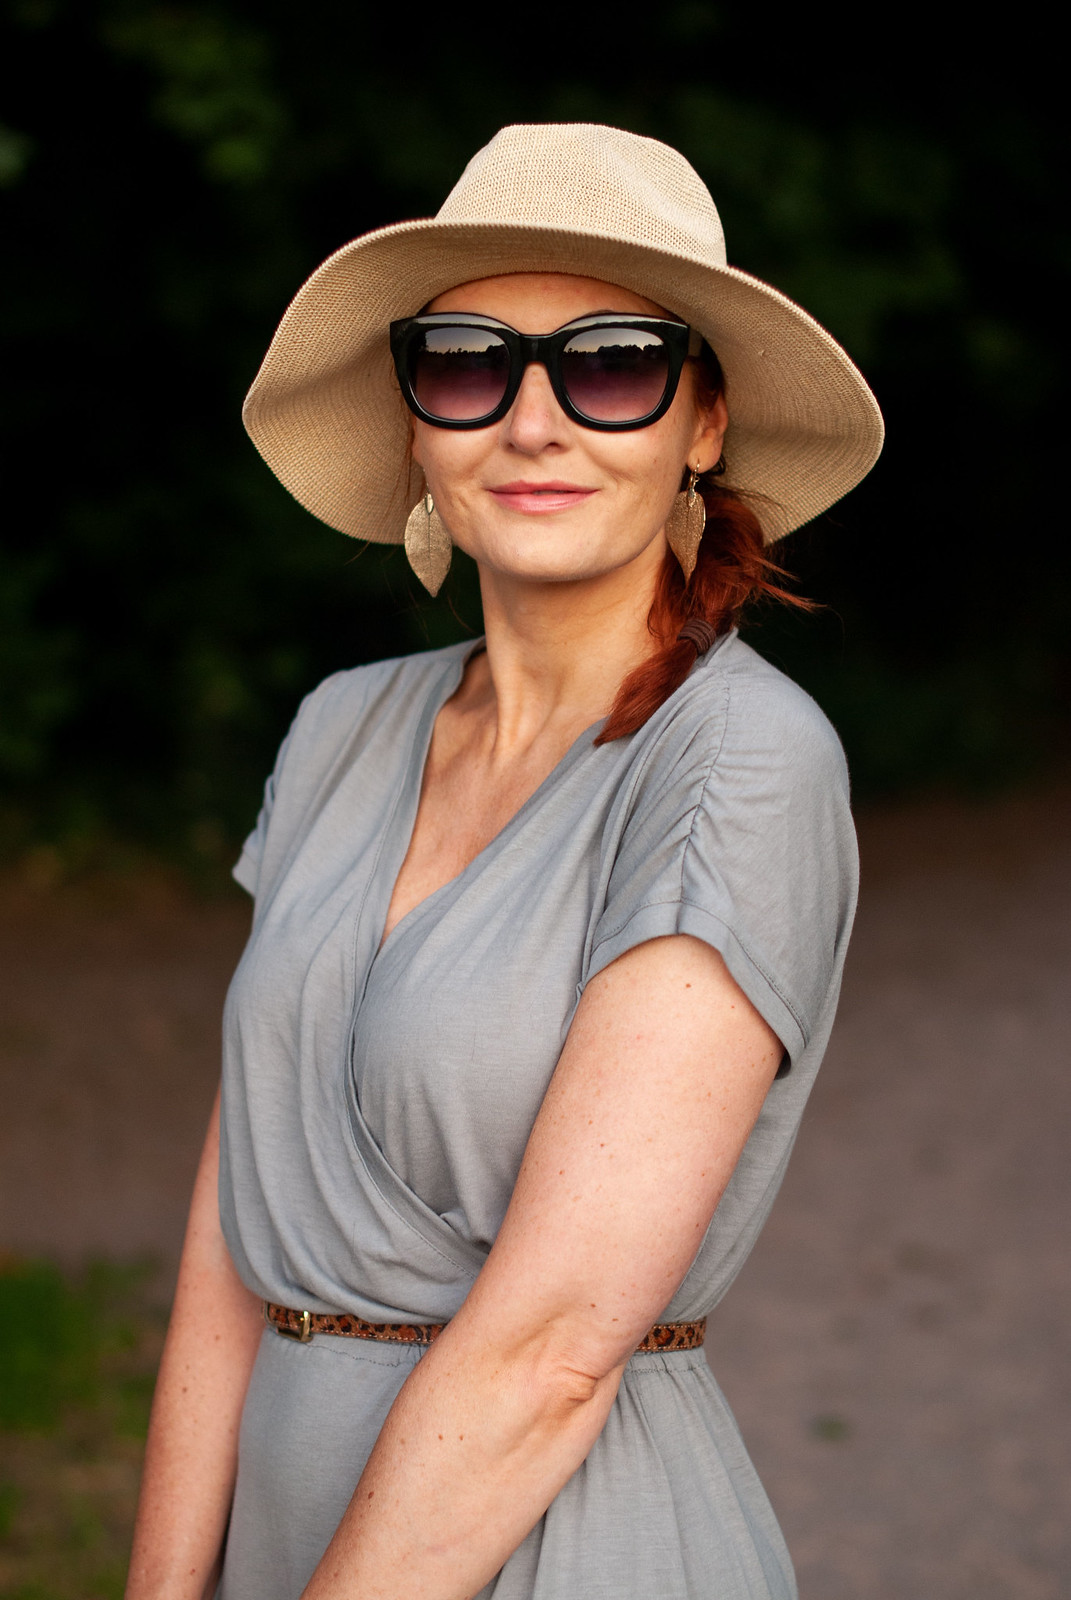 How to Keep Cool in the Summer and Still Cover Up \ grey Hot Squash maxi dress with CoolFresh fabric \ floppy straw hat \ straw basket bag \ black cat eye sunglasses \ strappy flat sandals | Not Dressed As Lamb, over 40 fashion